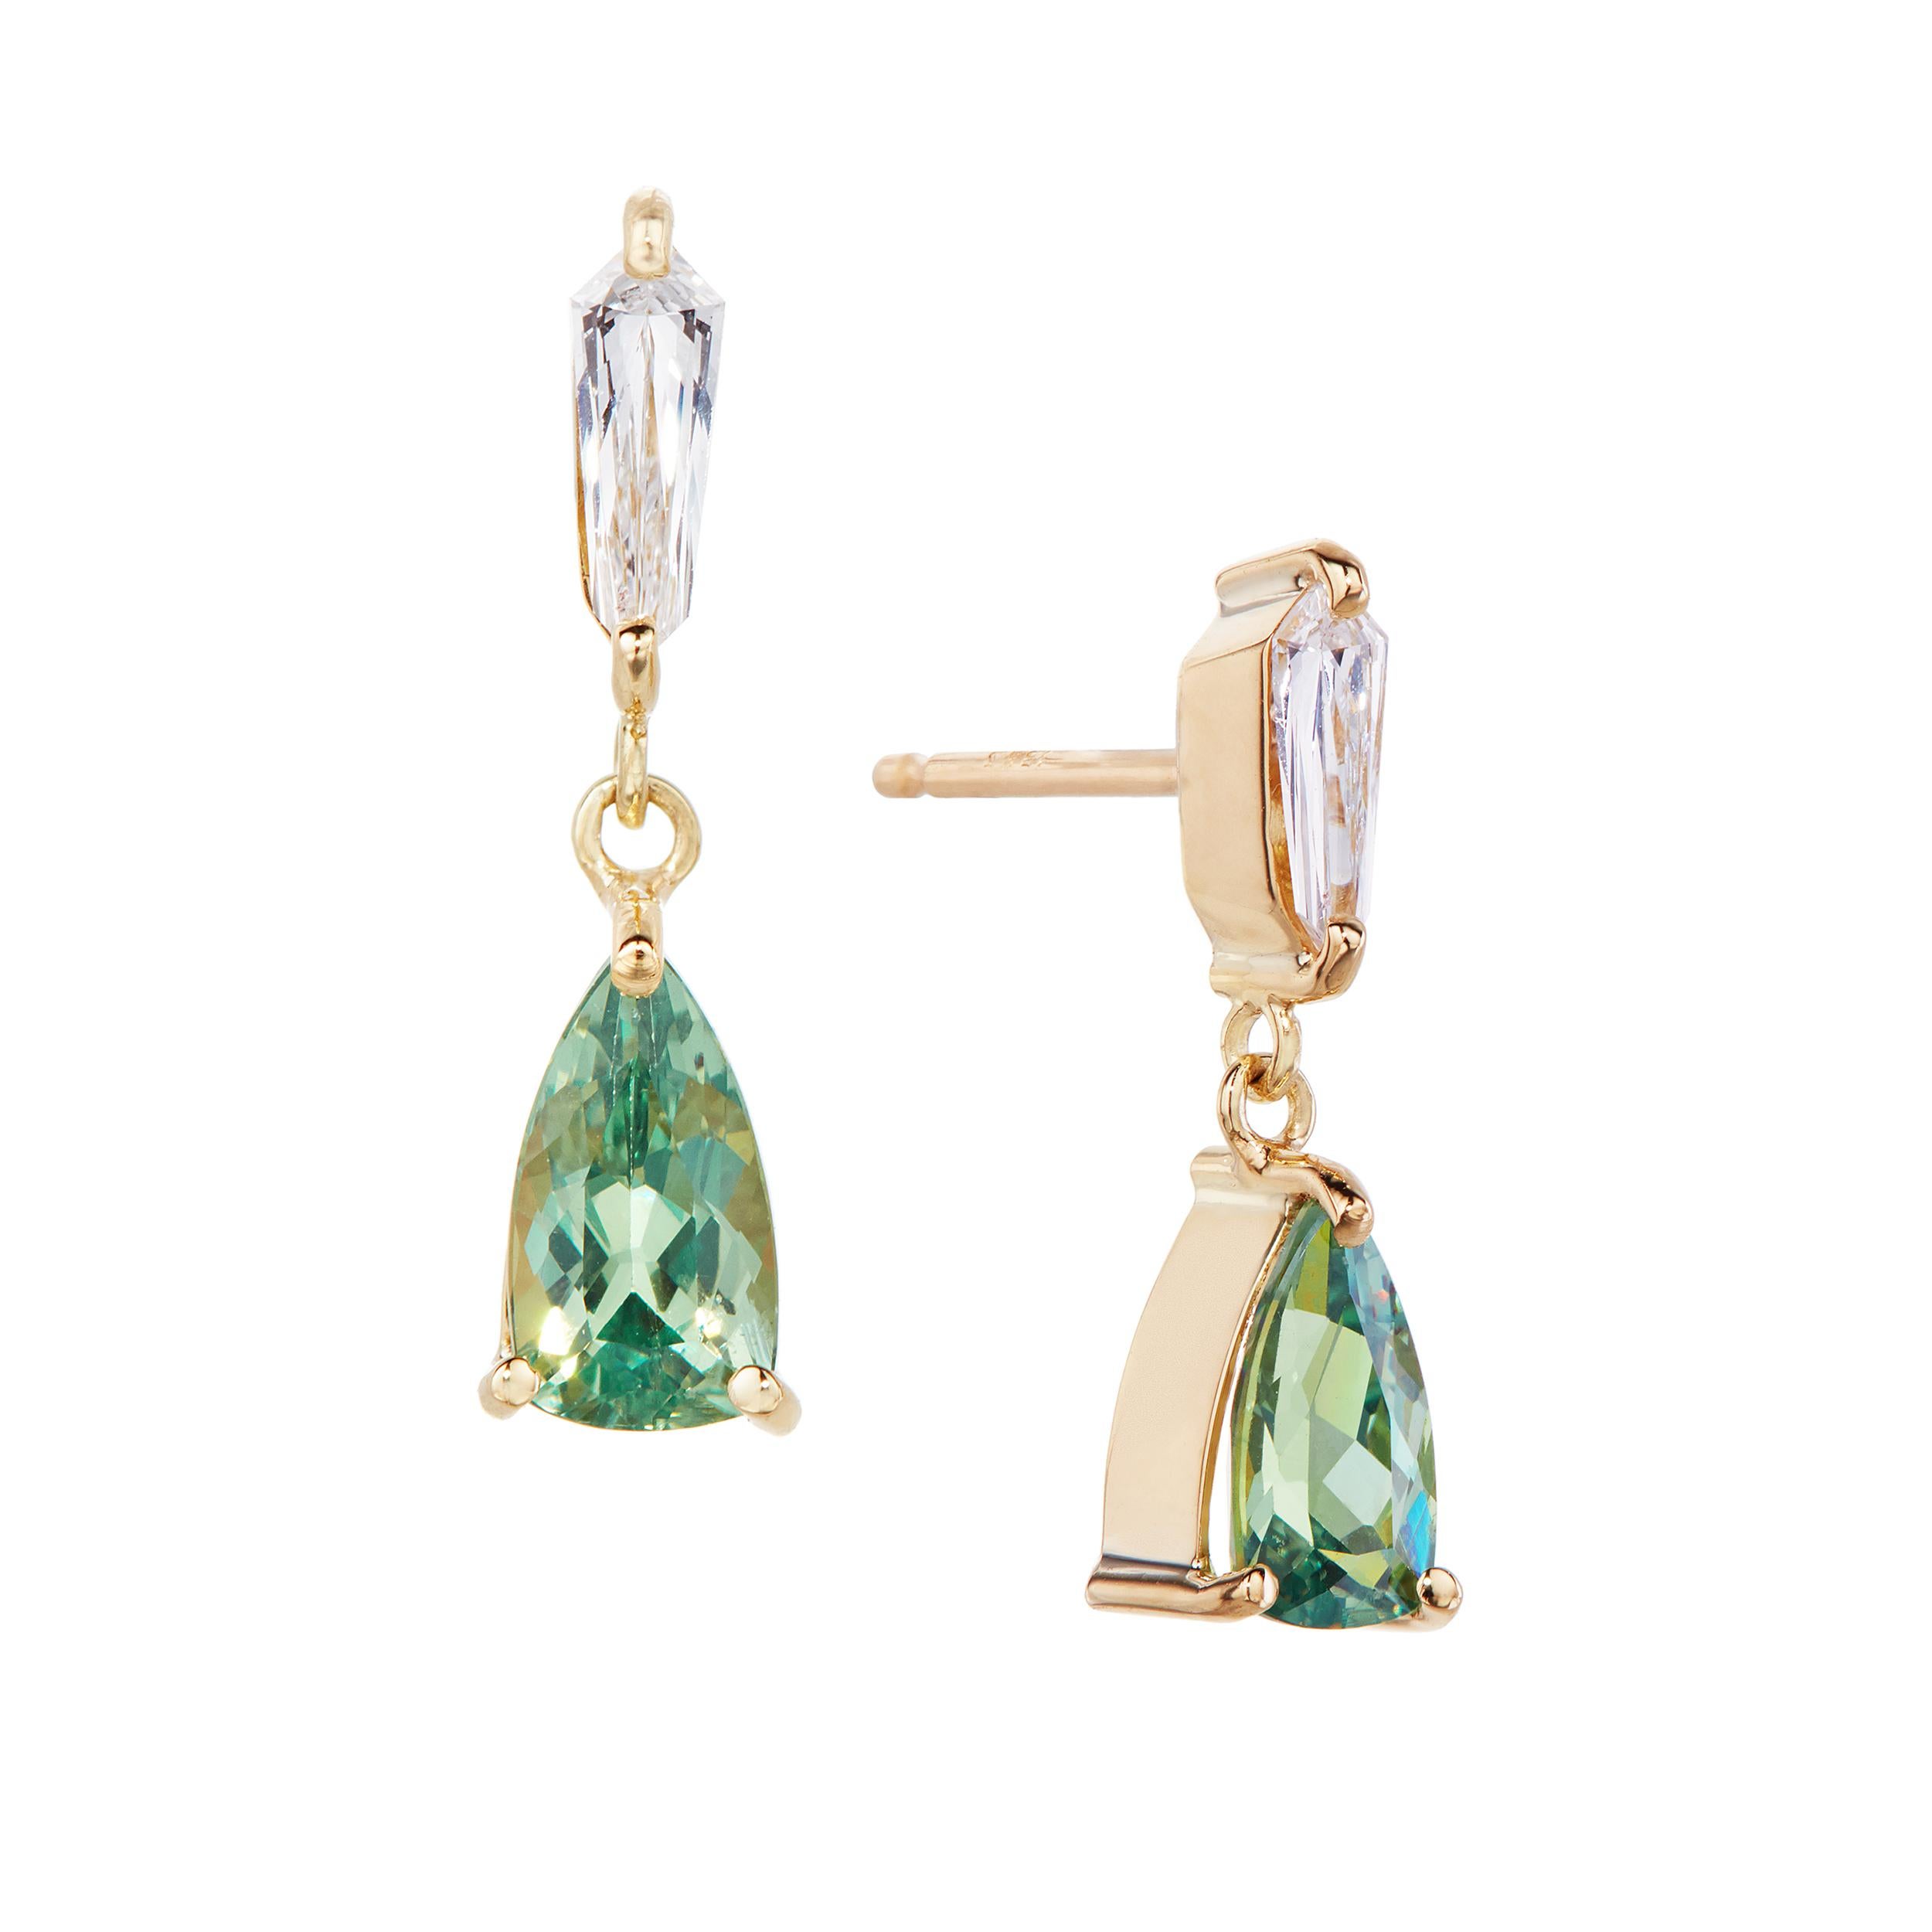 Gorgeous and rare Demantoid Garnet with the most stunning fancy-shaped Diamonds topping the earrings.

Matched Pair of Elongated Trillion Demantoid Garnets Weighing - 0.94 Carats
Matched Pair of Shield-shaped Diamonds Weighing - 0.19 Carats

Total